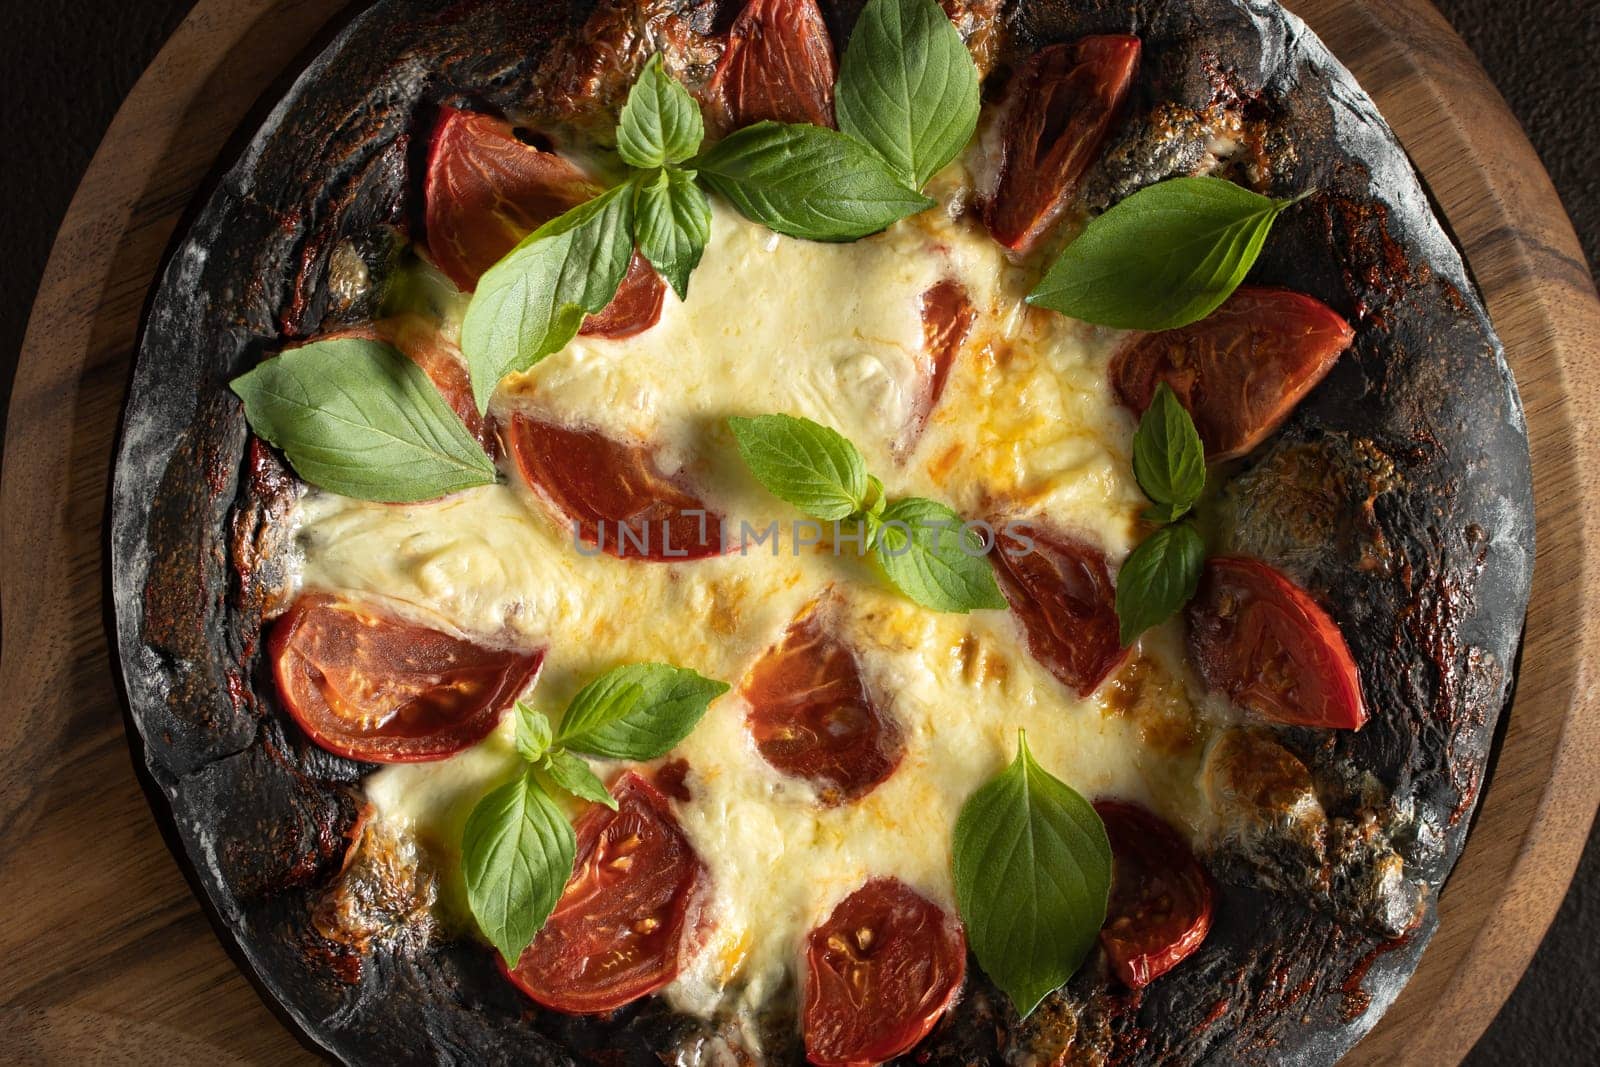 Black pizza margarita with tomatoes, mozzarella and basil. Dough with healthy bamboo charcoal powder, close up.